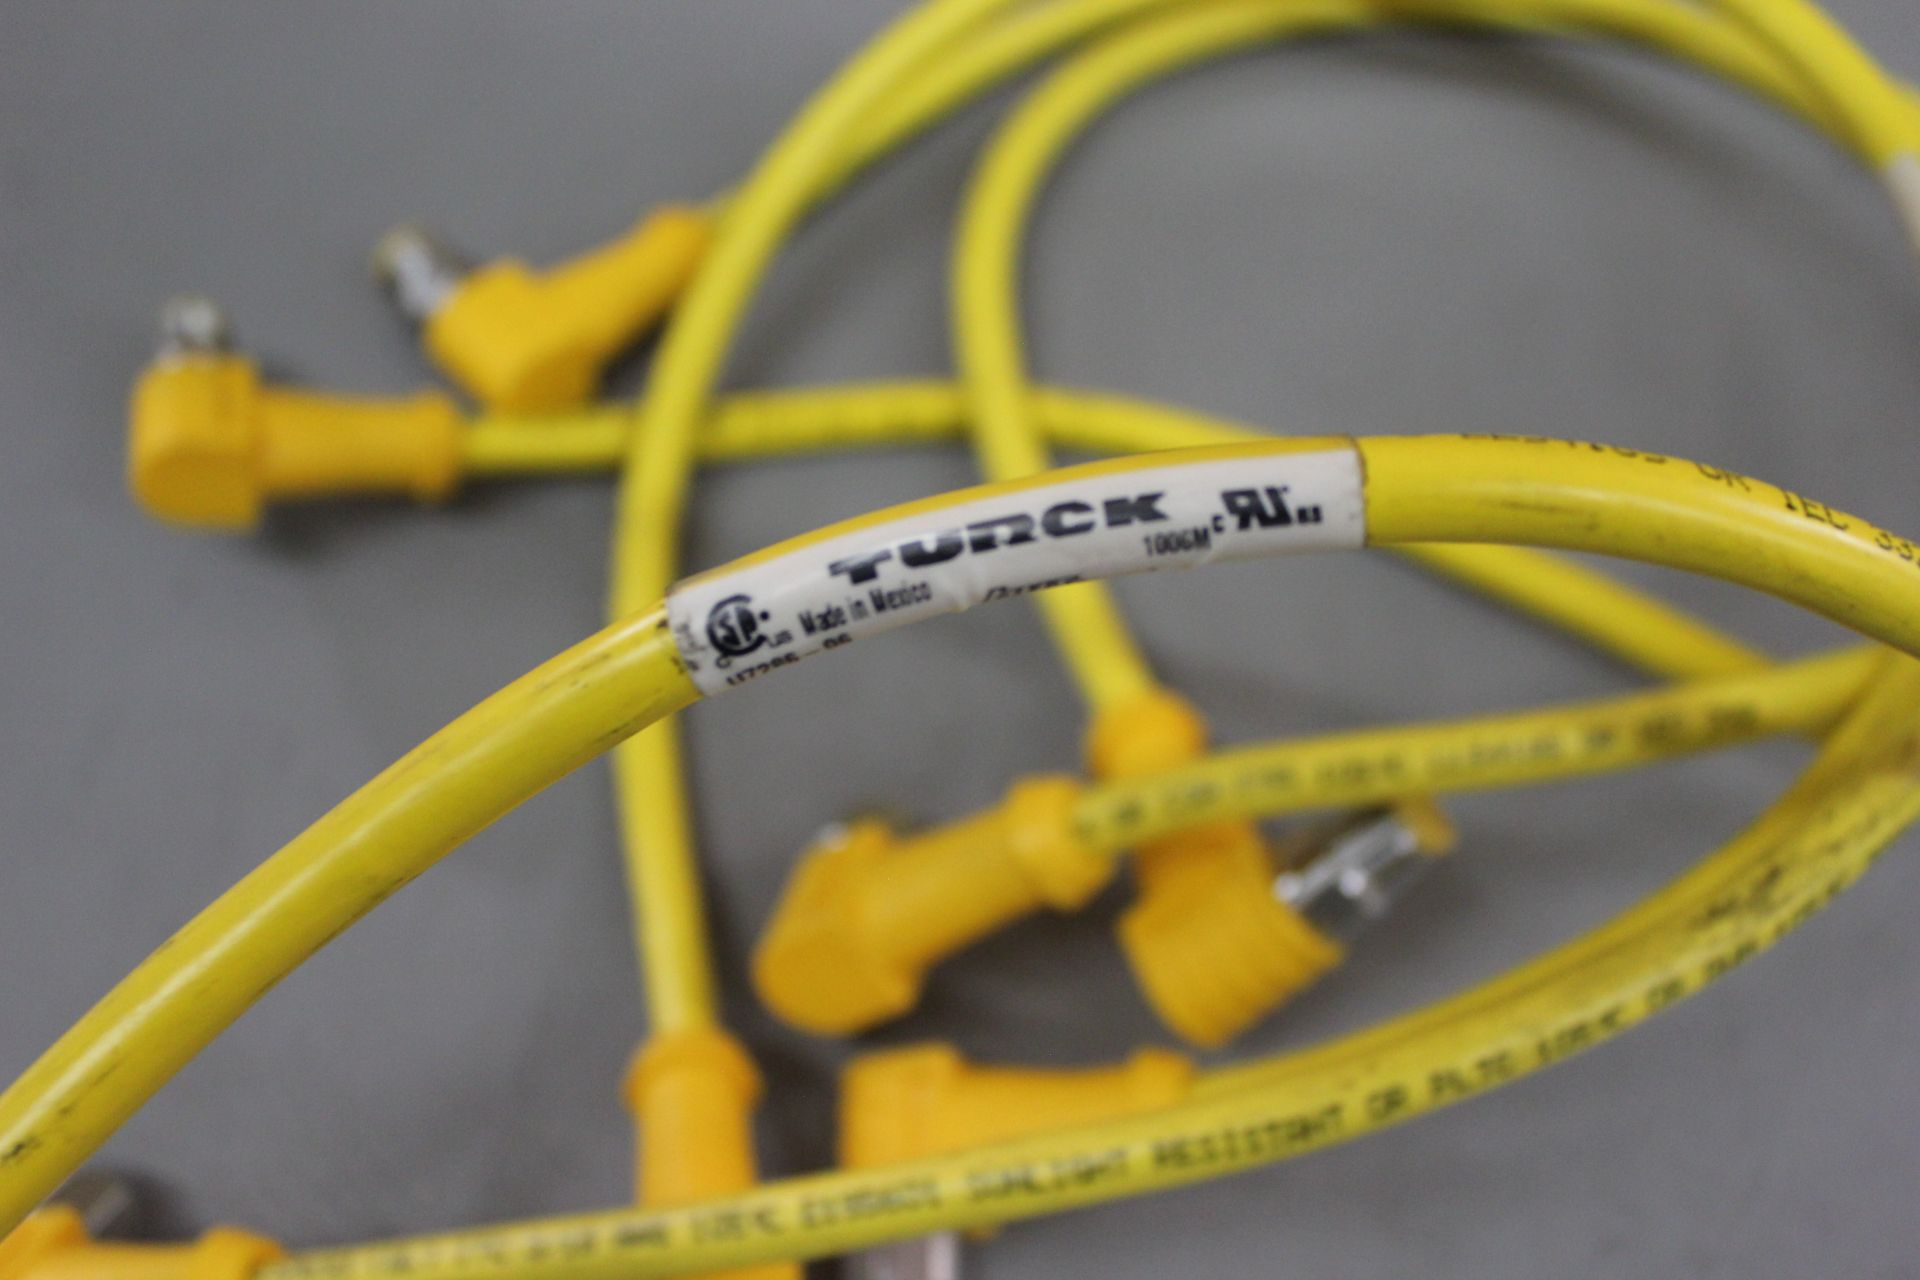 LOT OF TURCK CABLES - Image 4 of 4